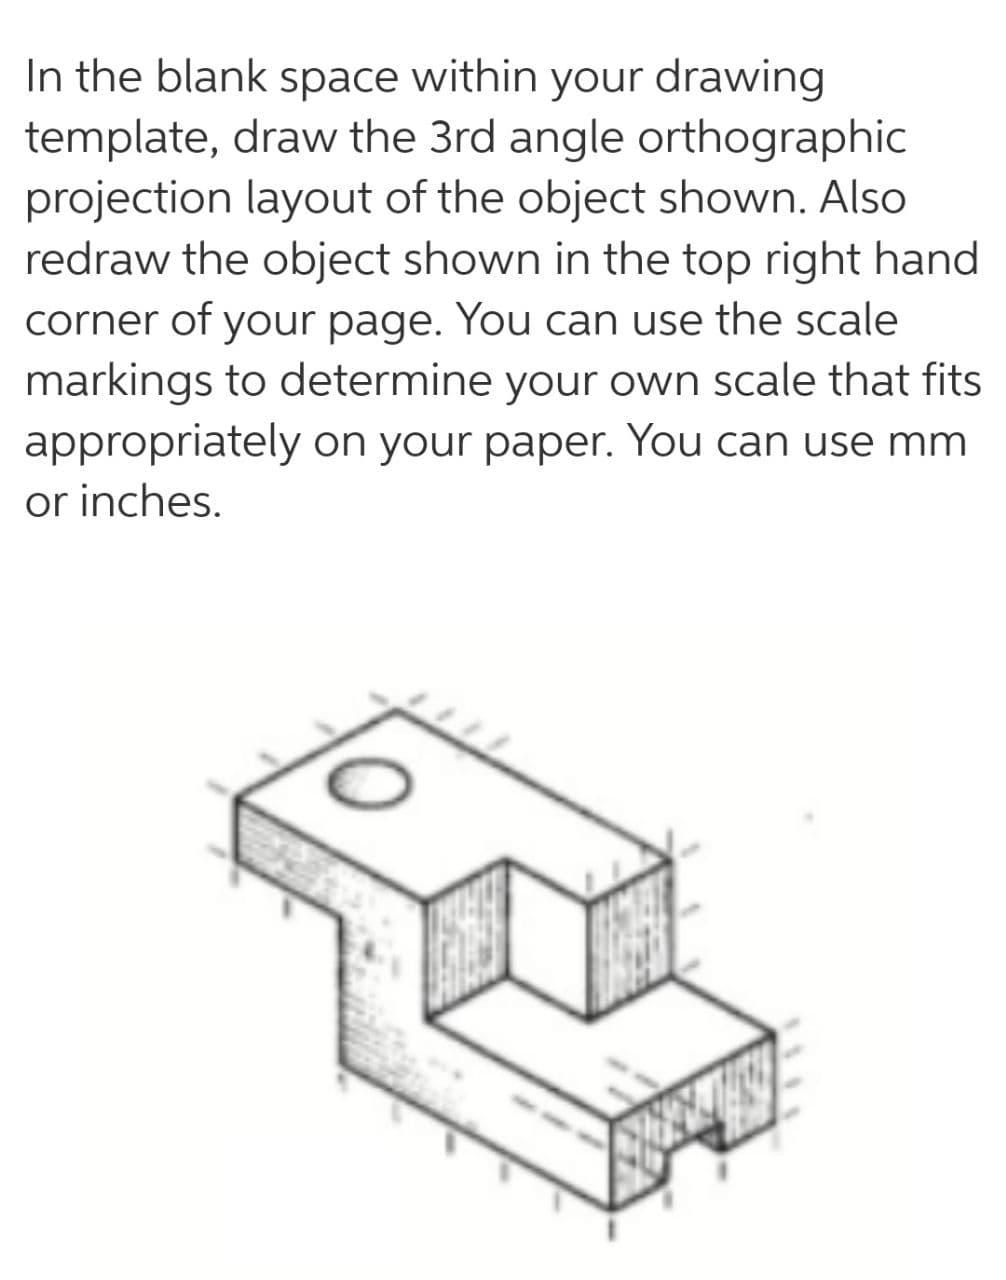 In the blank space within your drawing
template, draw the 3rd angle orthographic
projection layout of the object shown. Also
redraw the object shown in the top right hand
corner of your page. You can use the scale
markings to determine your own scale that fits
appropriately on your paper. You can use mm
or inches.
